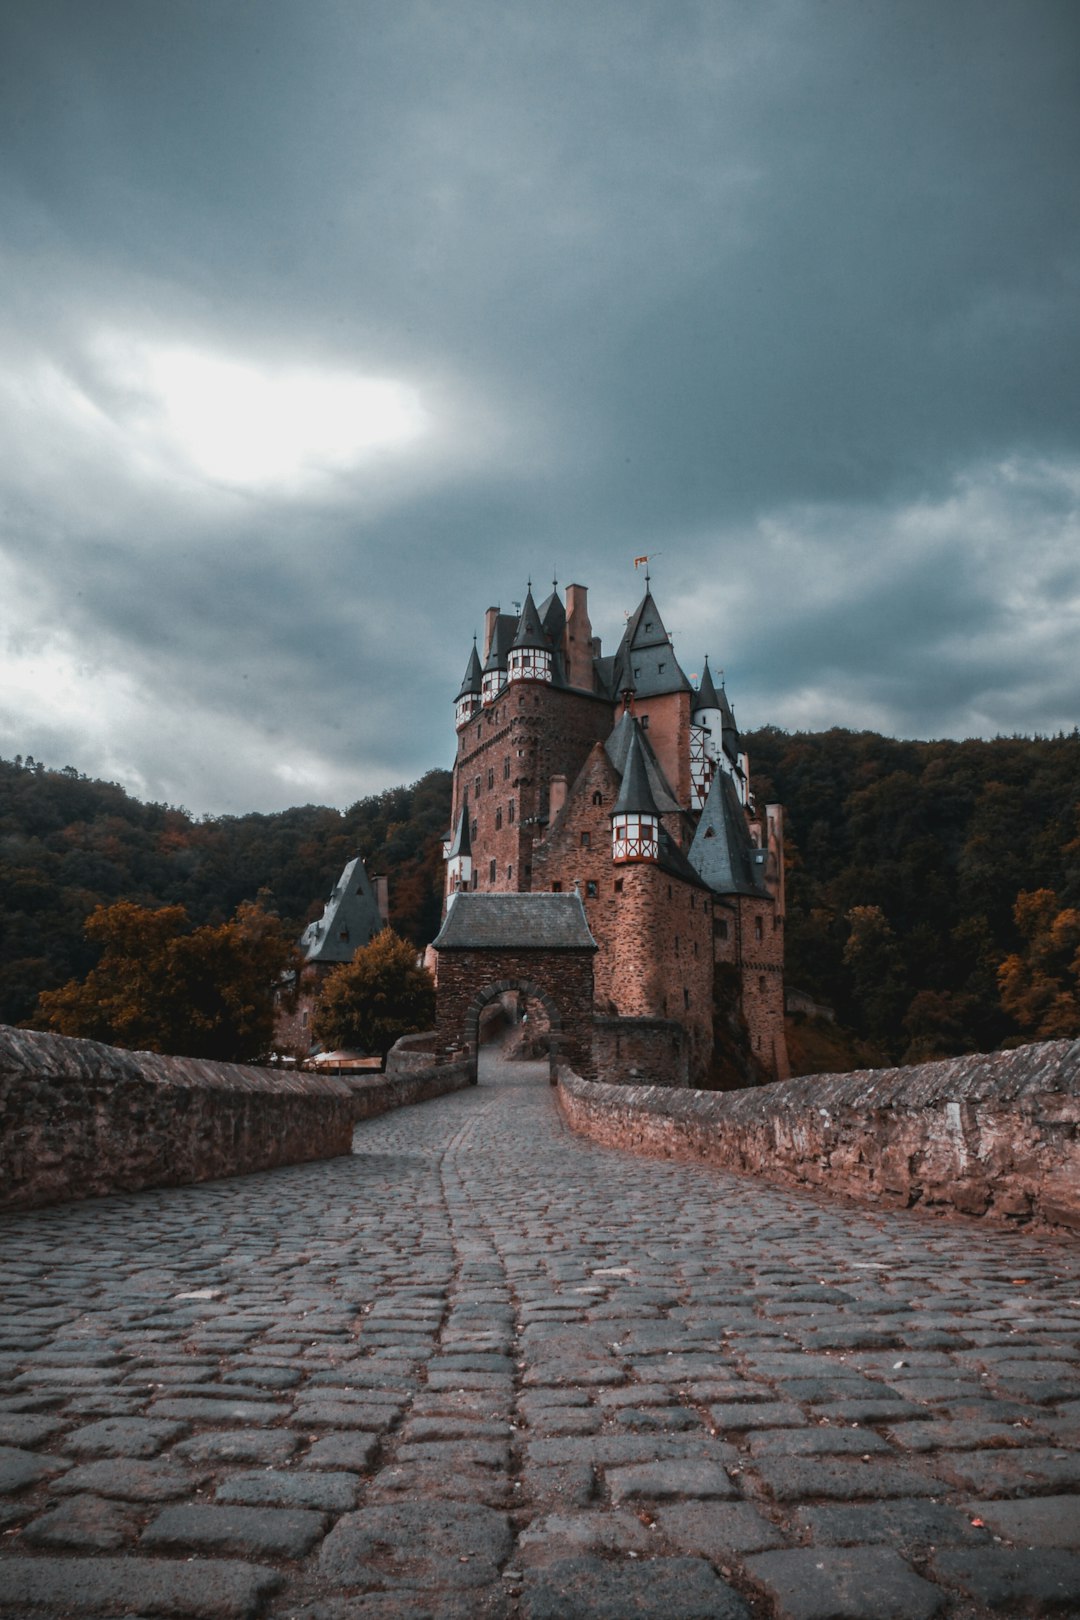 Travel Tips and Stories of Eltz Castle in Germany